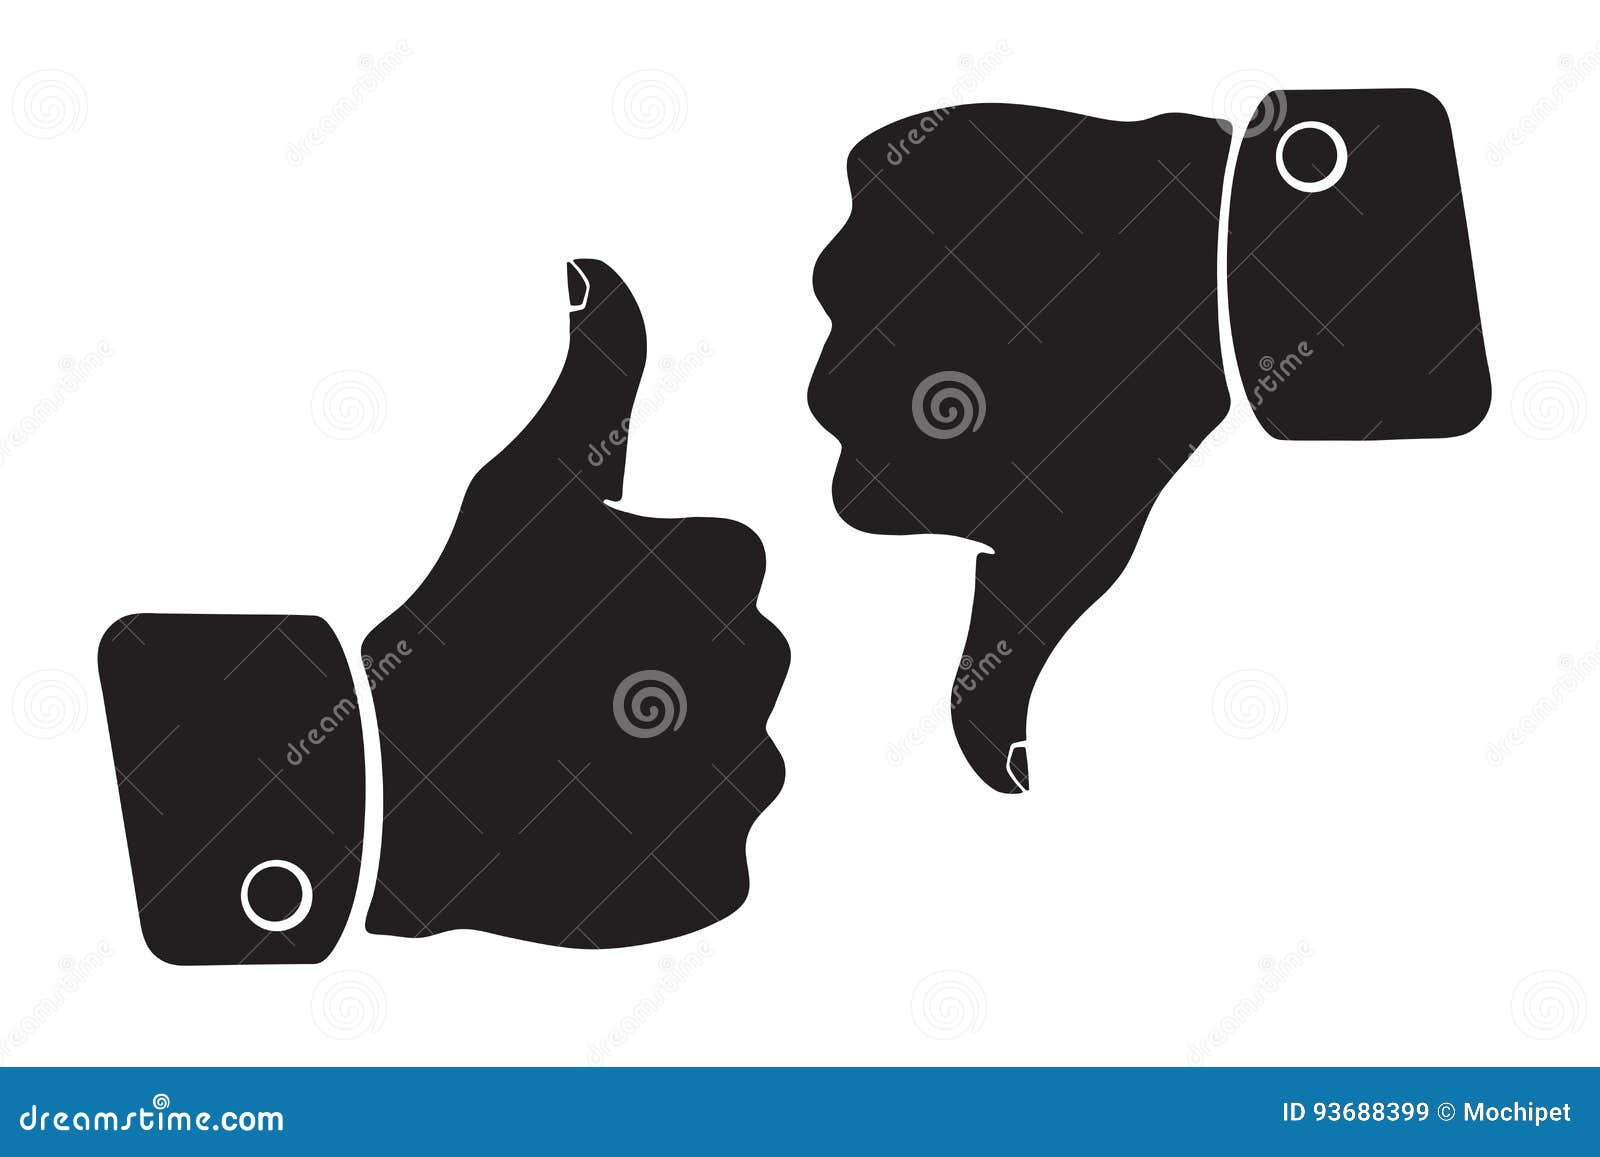 silhouette of thumb up and thumb down s of like and dislike